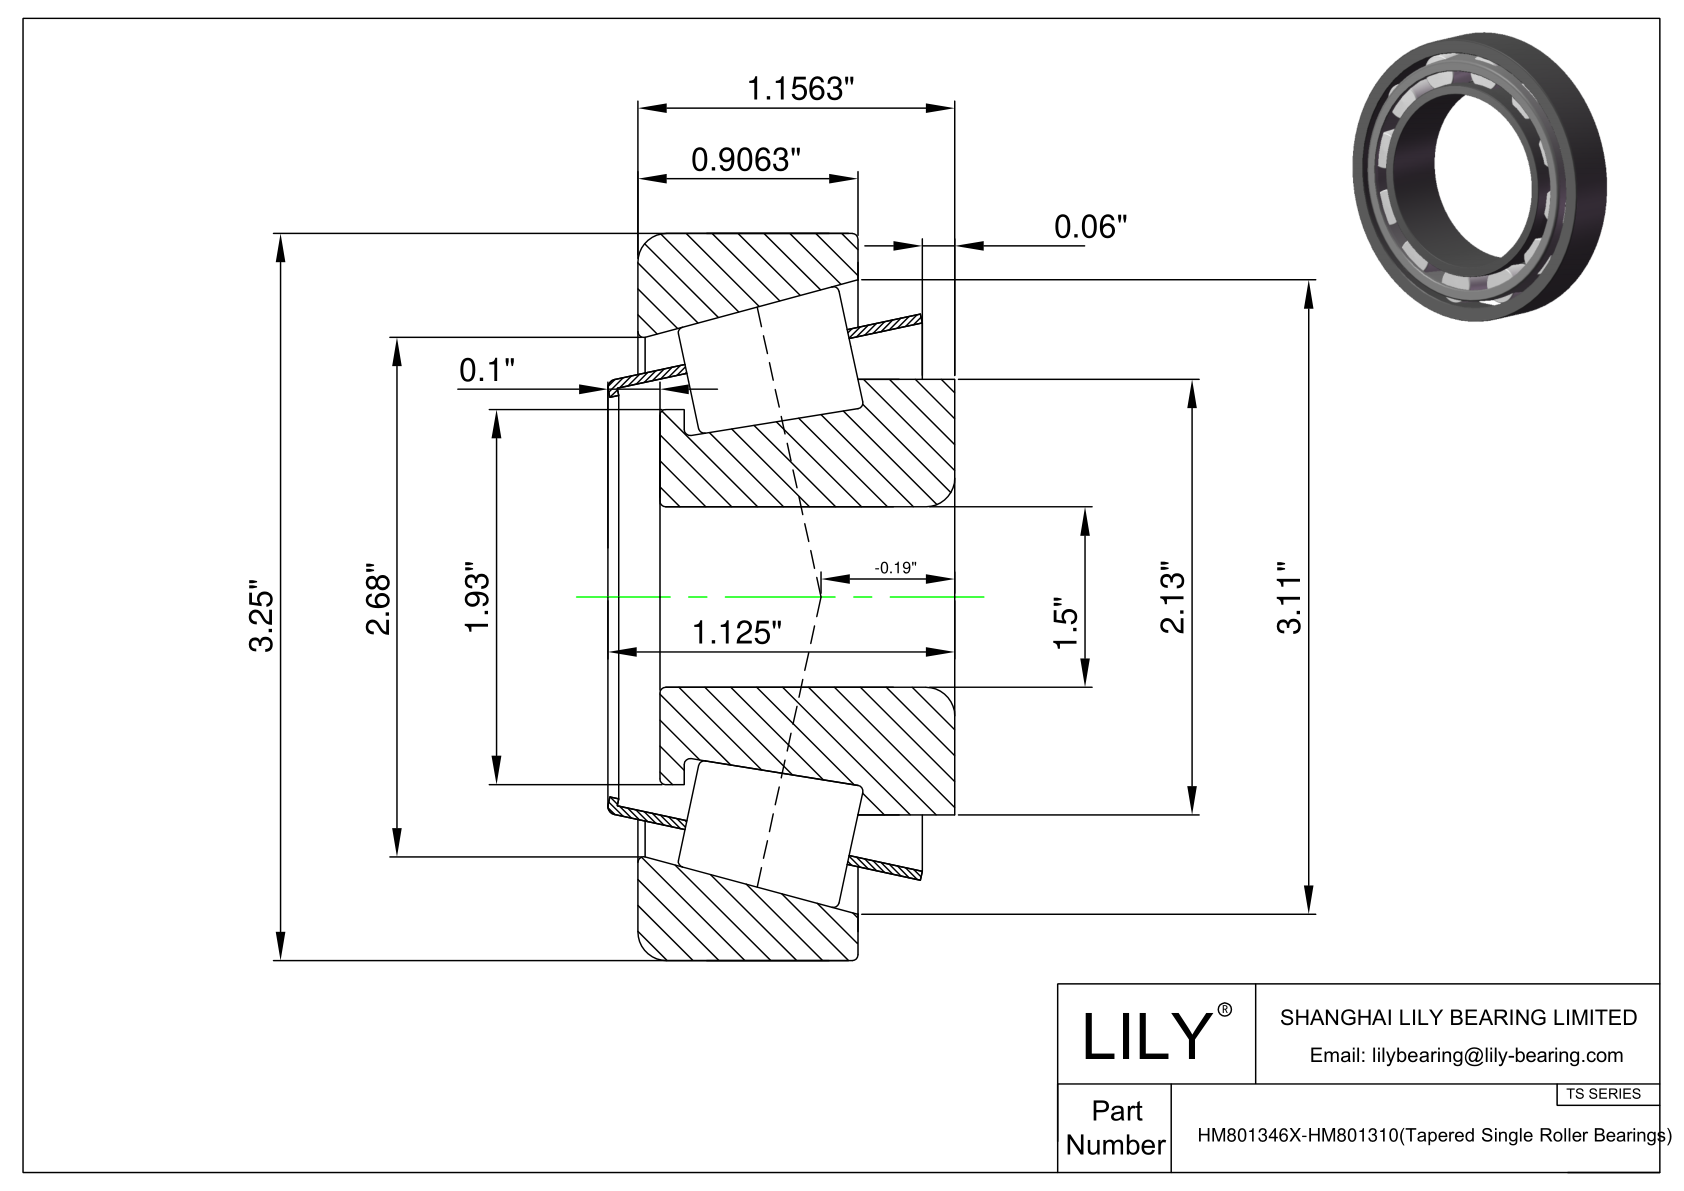 HM801346X-HM801310 TS (Tapered Single Roller Bearings) (Imperial) cad drawing